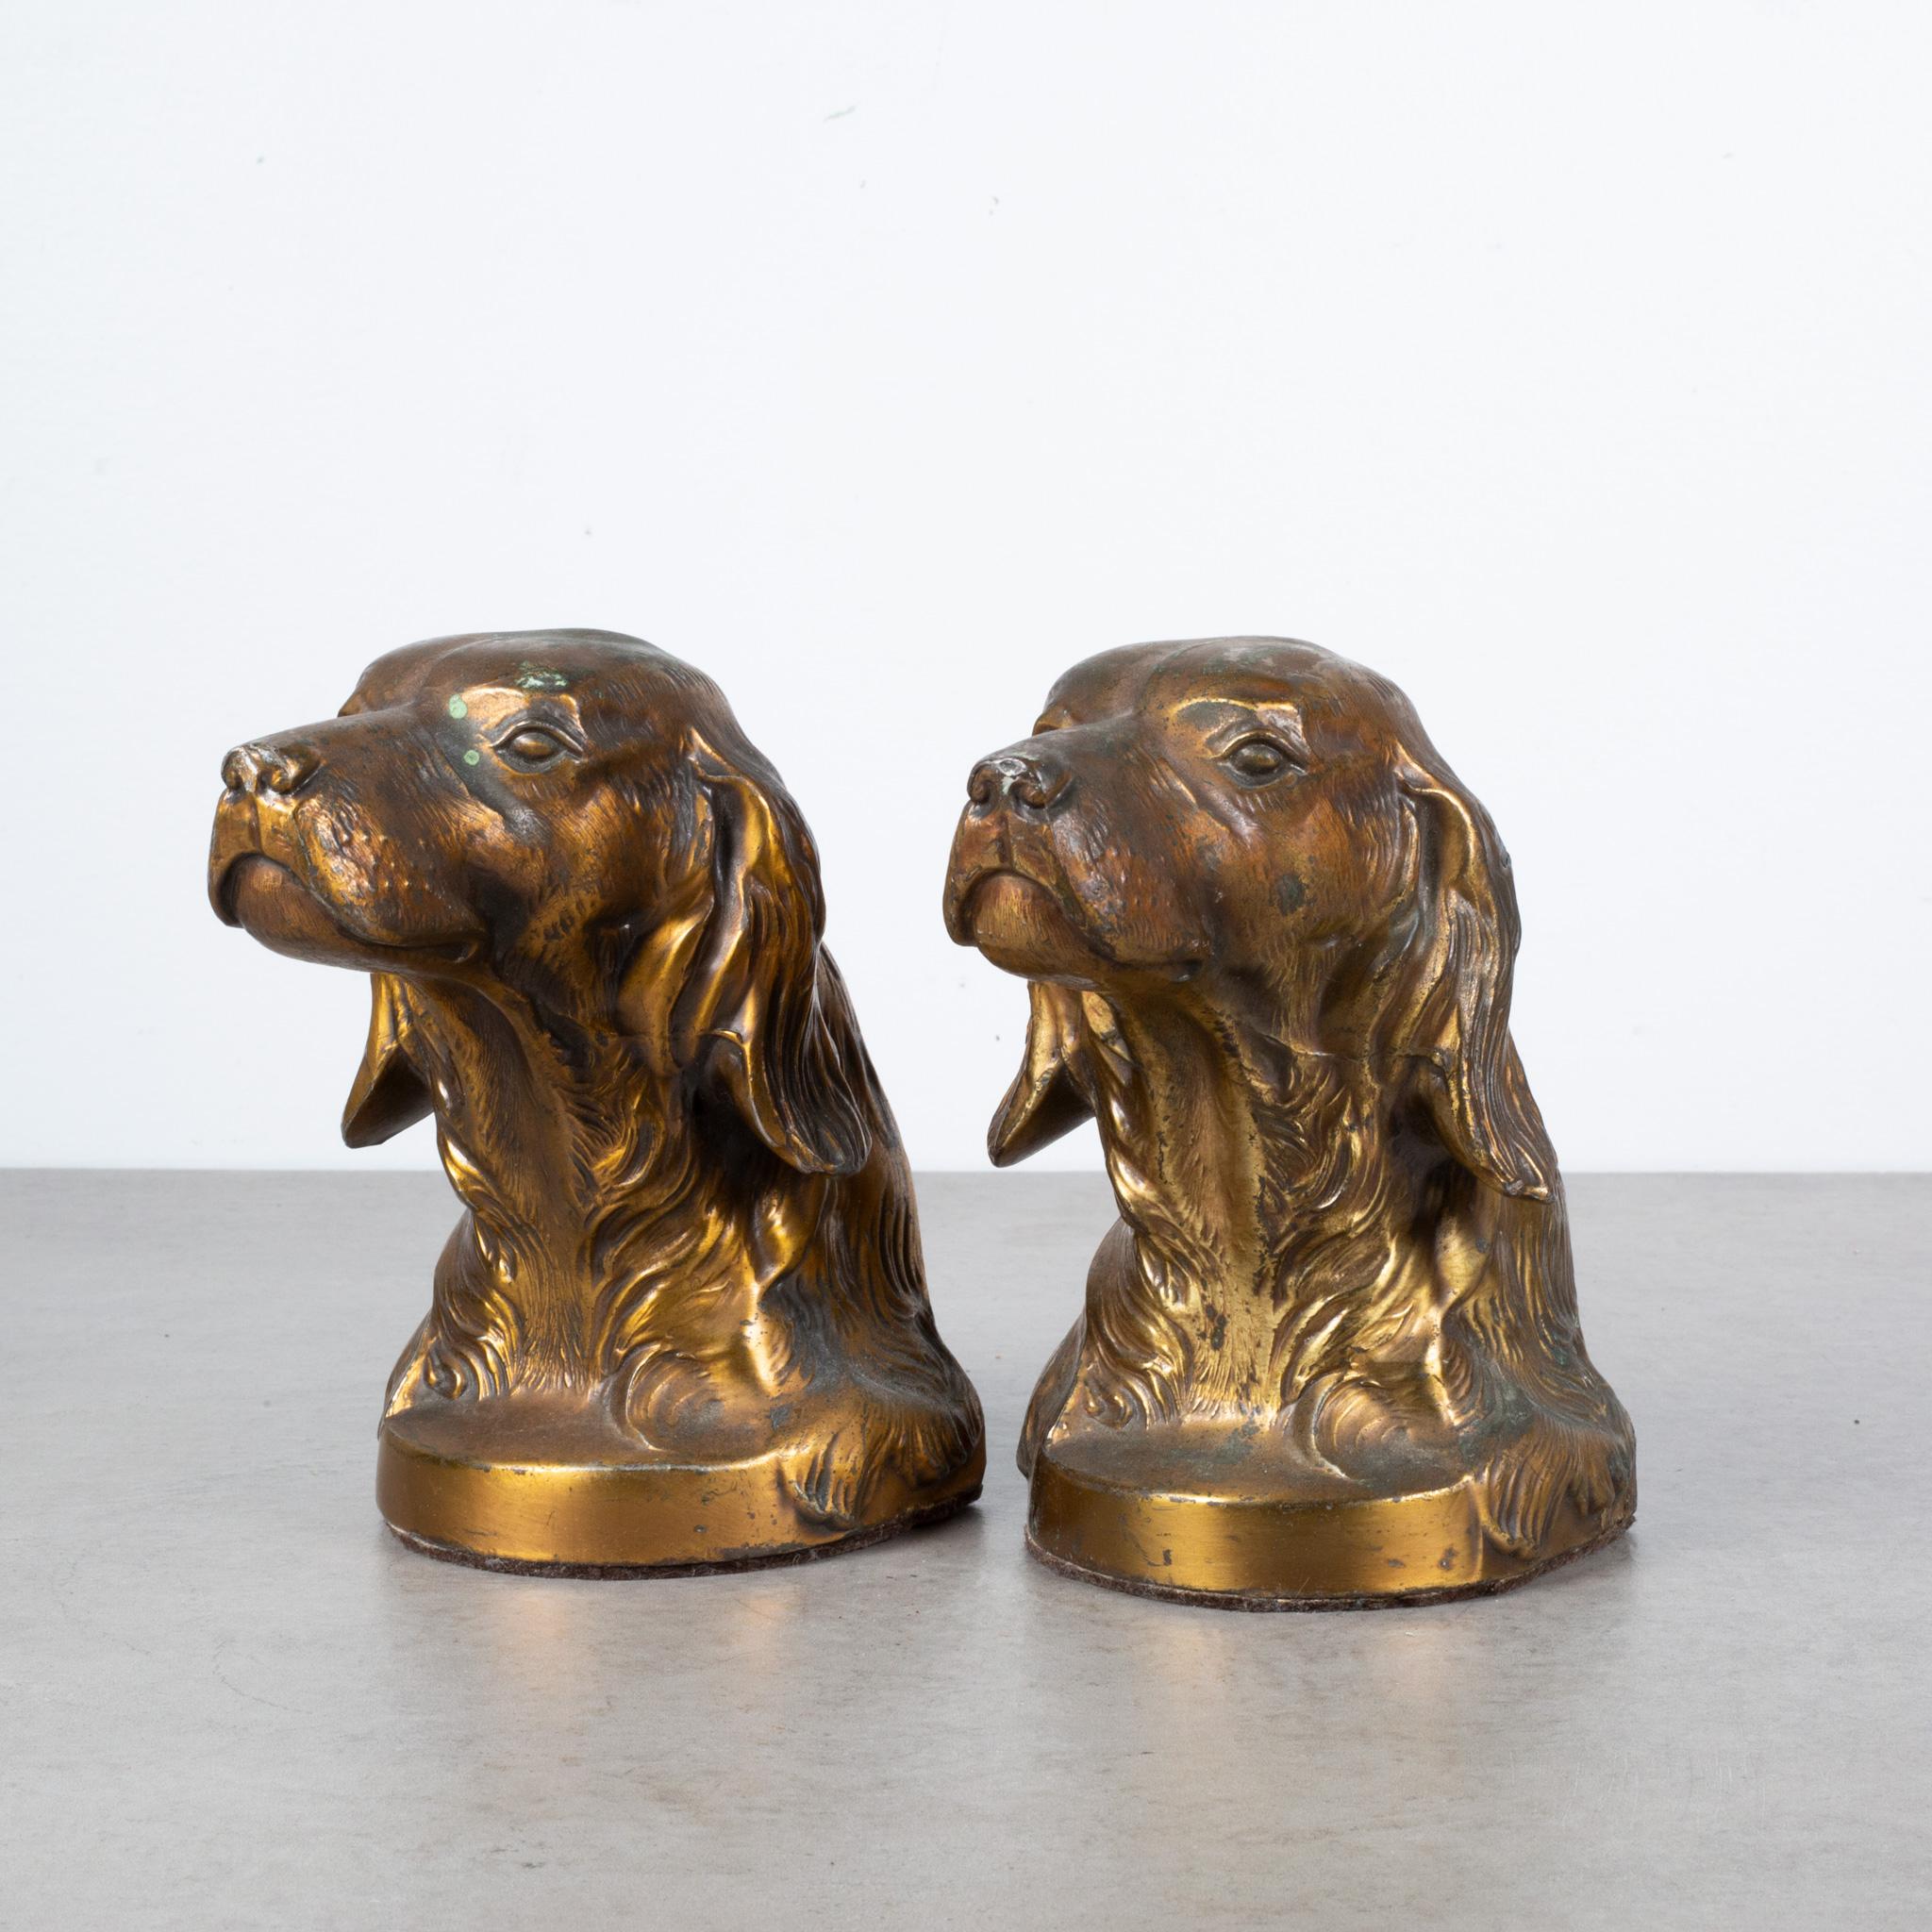 About:

A pair of original bronze plated bookends with original felt on the bottom. Both bookends are in good condition and have retained their finish and have the appropriate patina consistent with age and use.

Creator: Philadelphia Metal